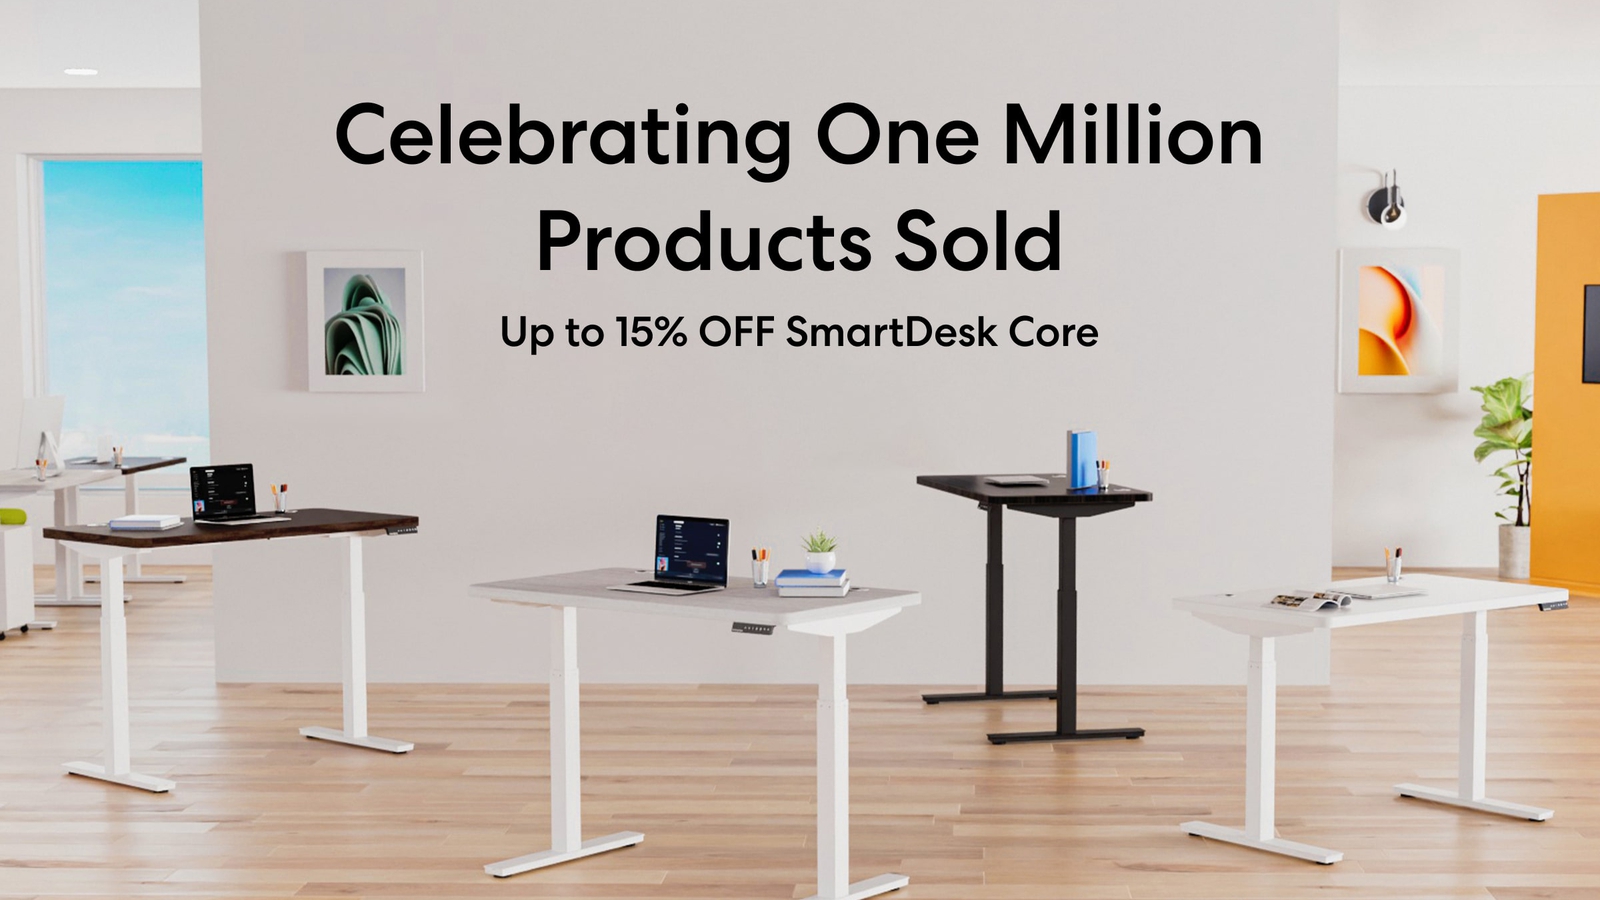 SmartDesk Core - Our Most Popular Product - Up to 15% OFF